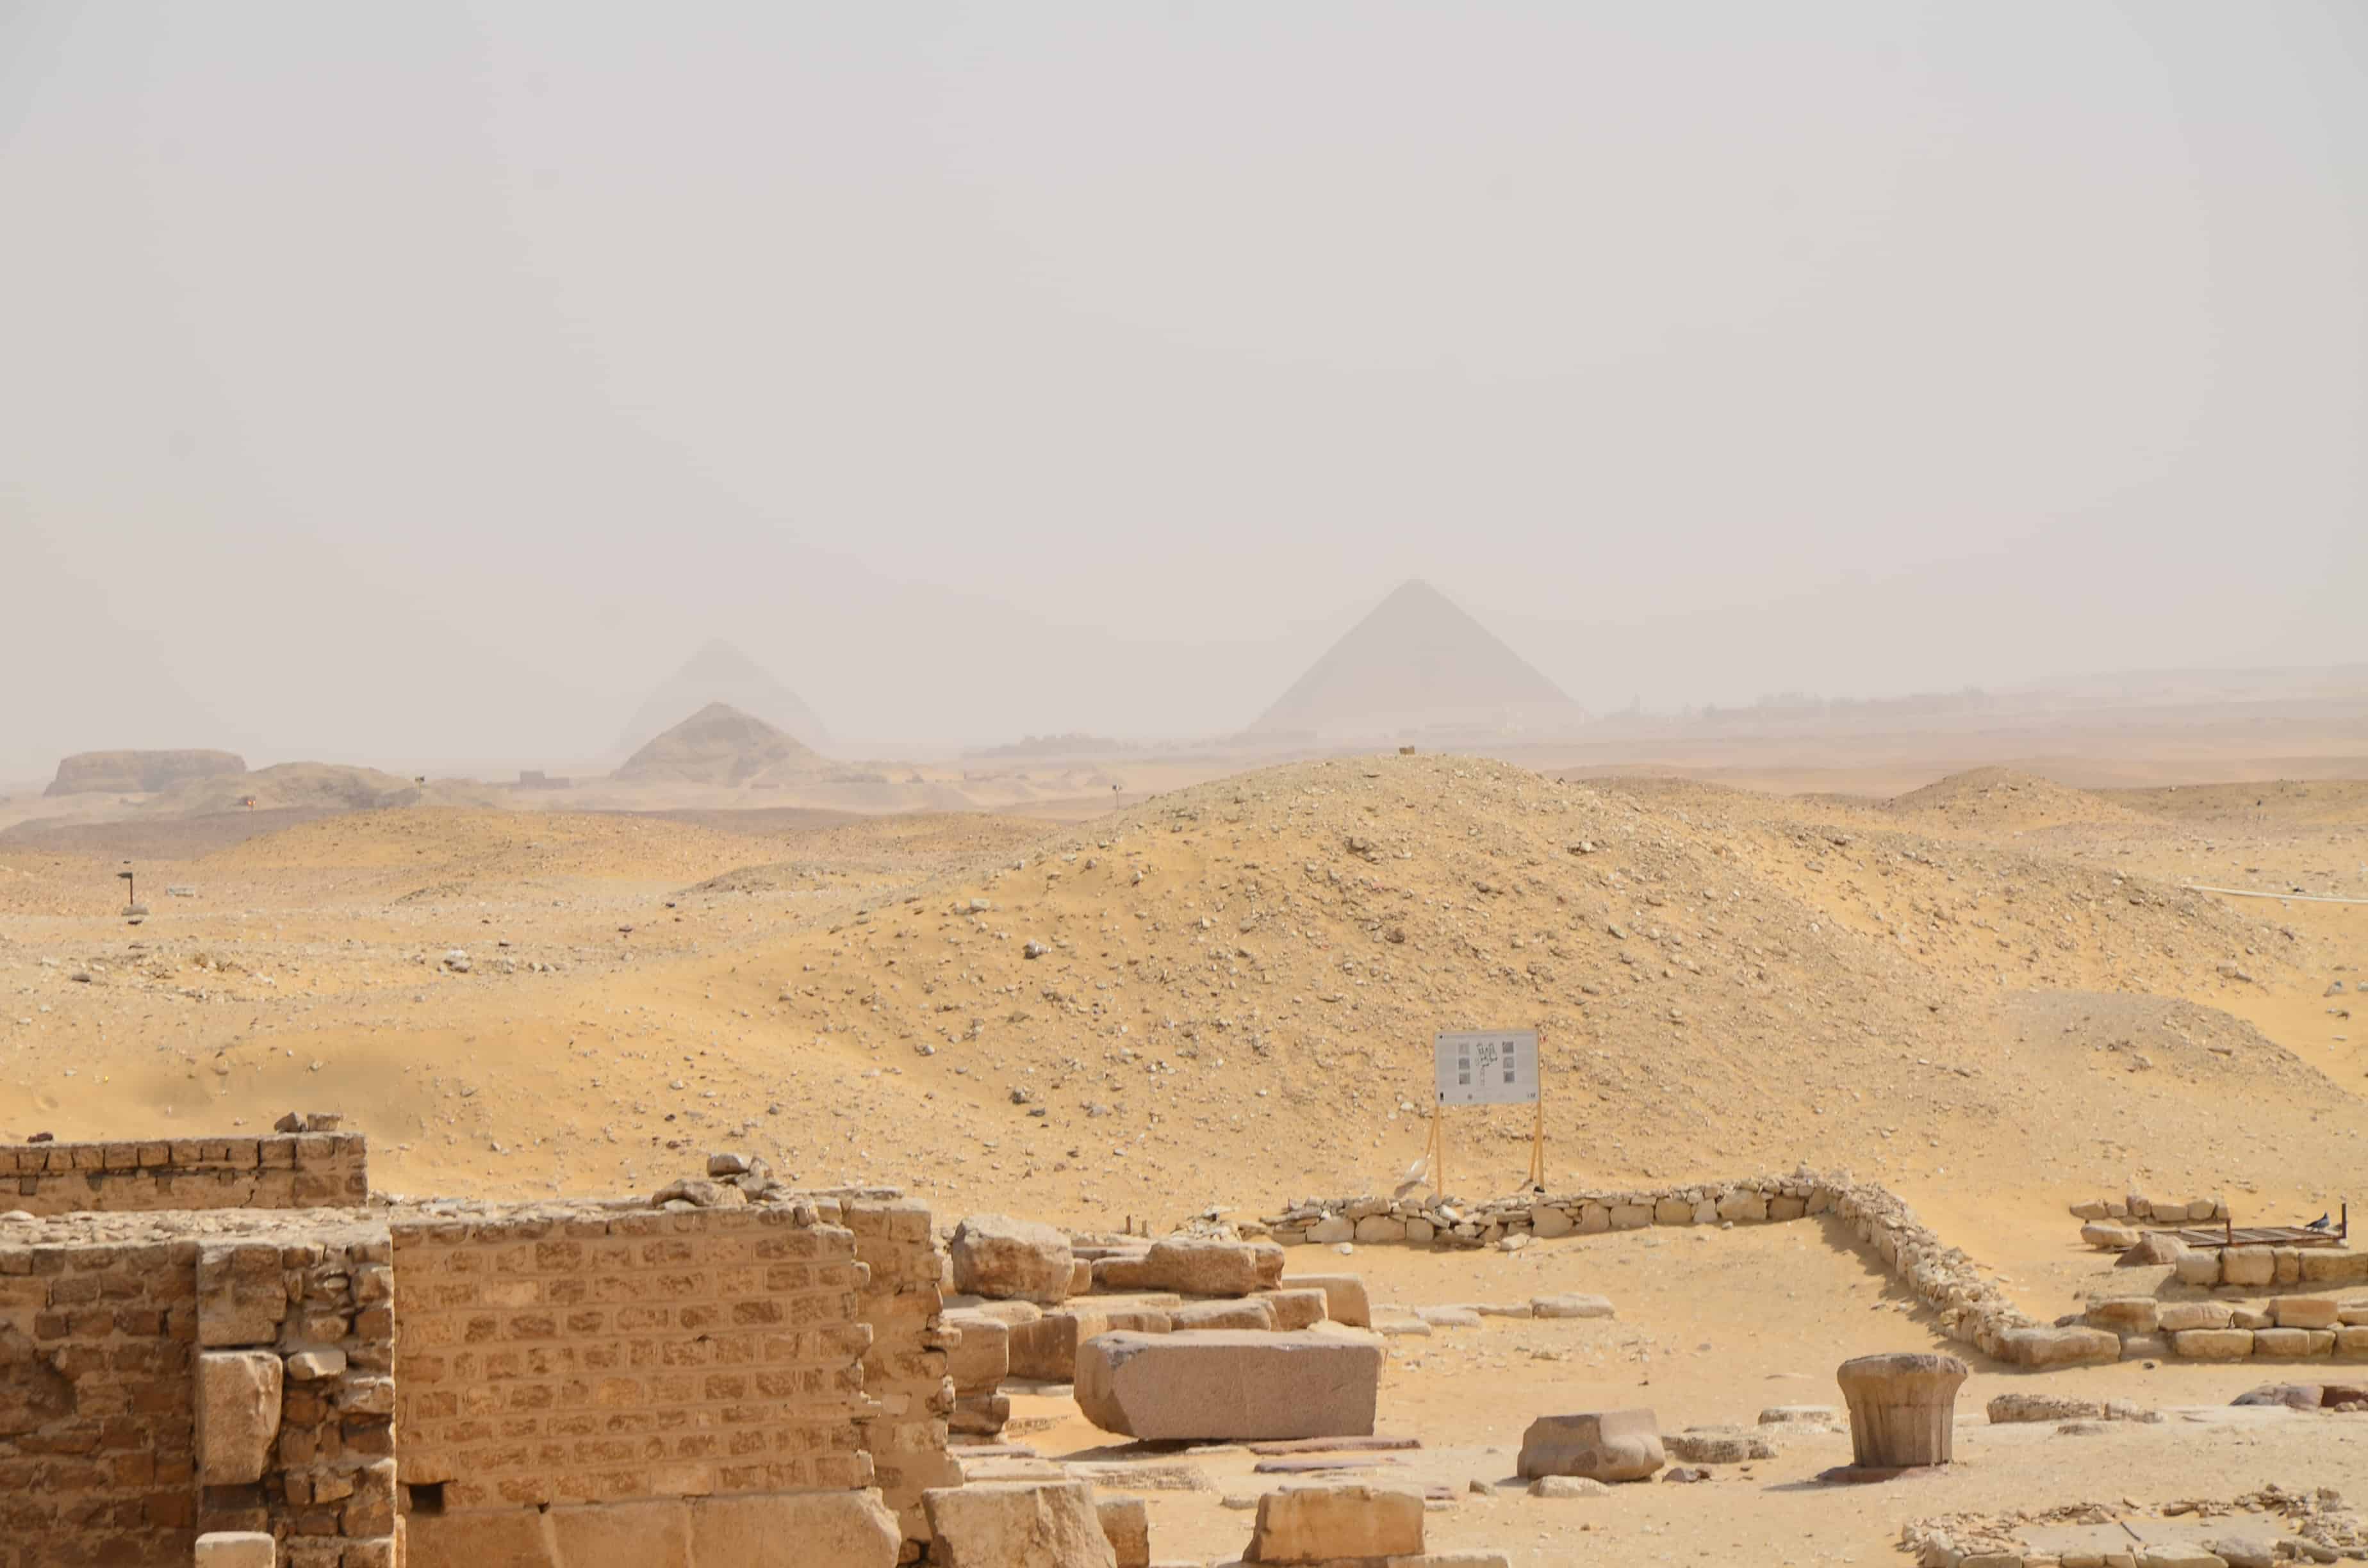 The Red Pyramid and the Bent Pyramid in the distance at Saqqara, Egypt